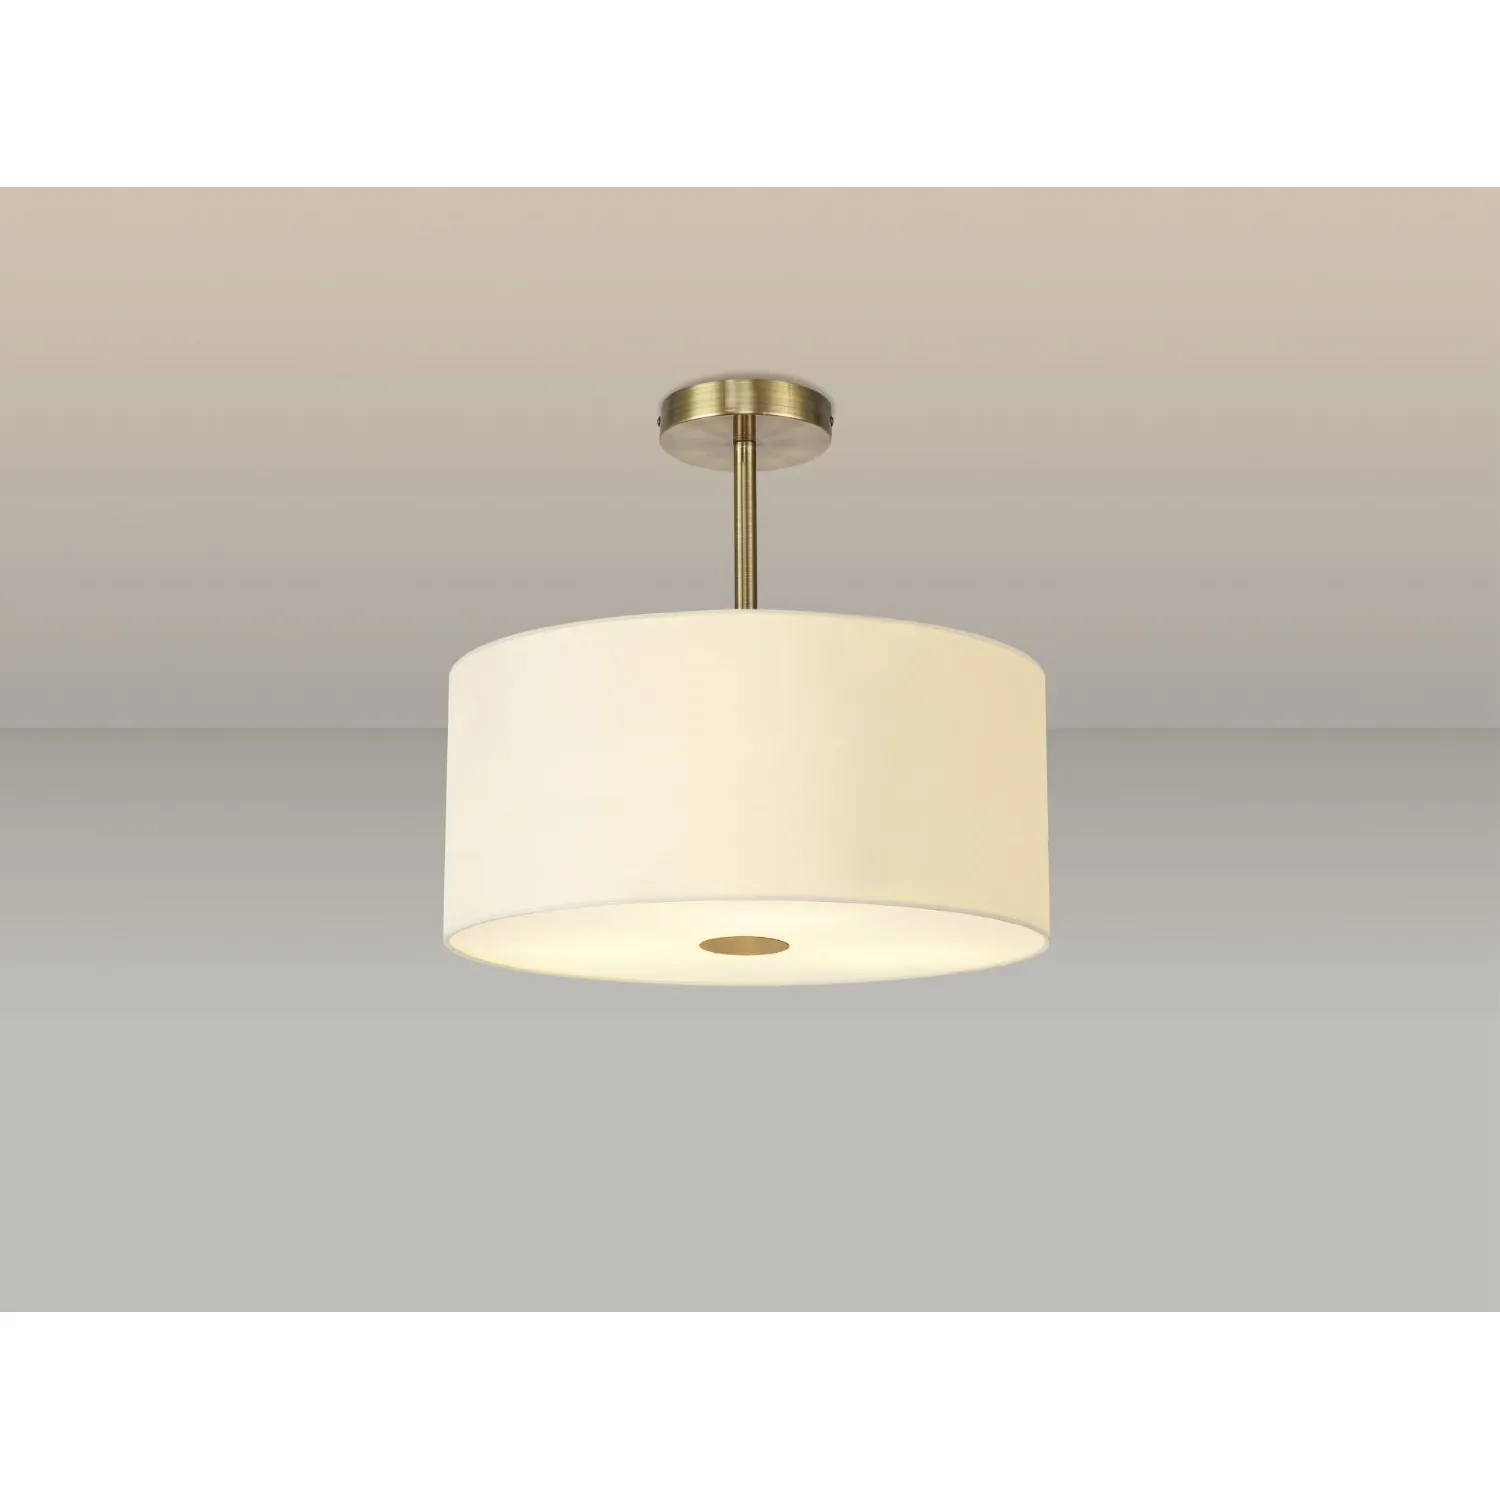 Baymont Antique Brass 5 Light E27 Semi Flush c w 400mm Faux Silk Shade, Ivory Pearl White Laminate And 400mm Frosted AB Acrylic Diffuser